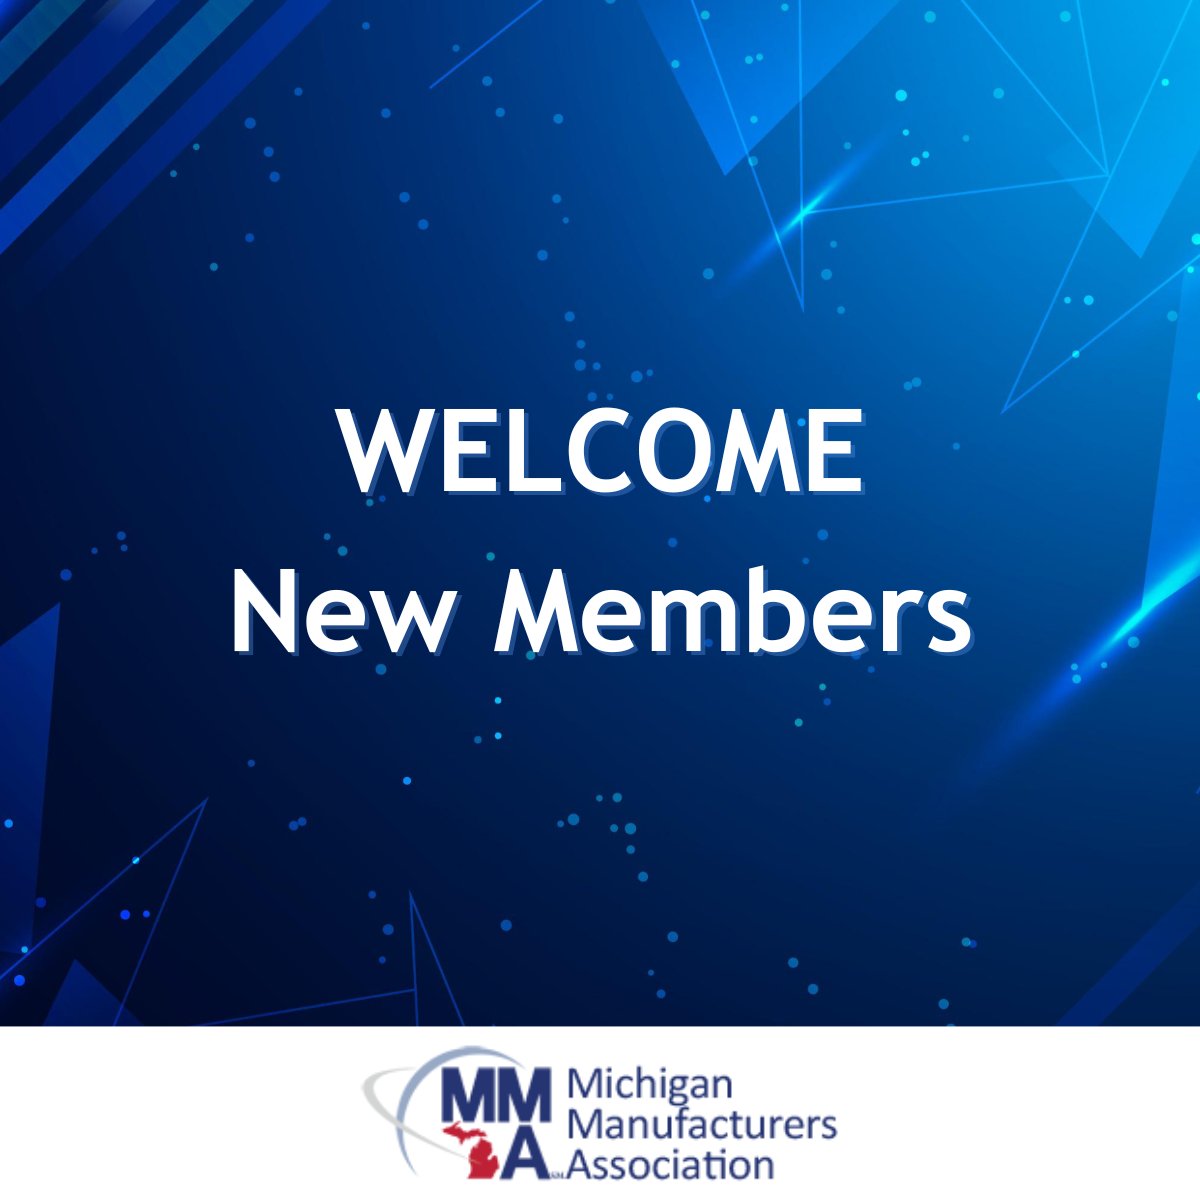 Let's give a warm welcome to our newest members: SUMIT USA Veolectra Inc WENZEL America Explore a world of MMA membership options and exciting opportunities at bit.ly/3MVbkwx to elevate your industry engagement and growth today. #MiManufacturers